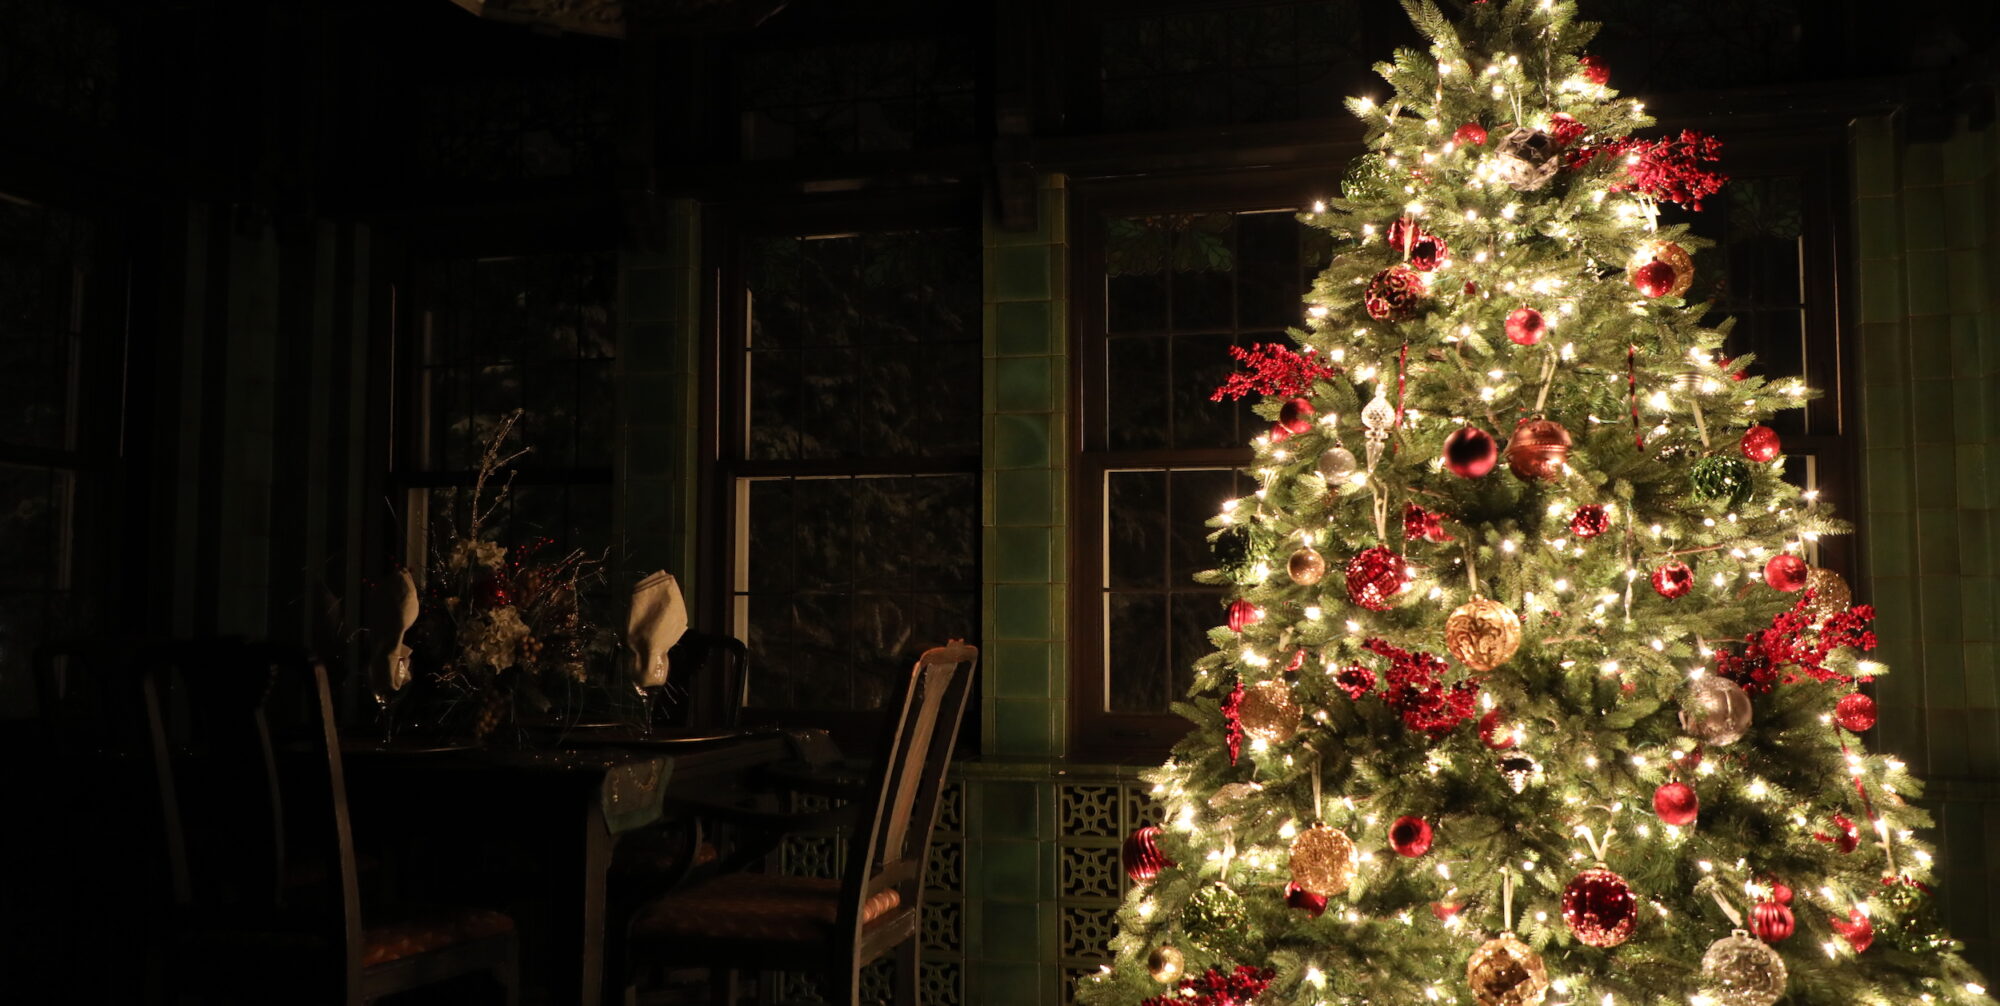 A tree lit with white lights and red ornaments and decor stands in front of dark windows in a dark room.